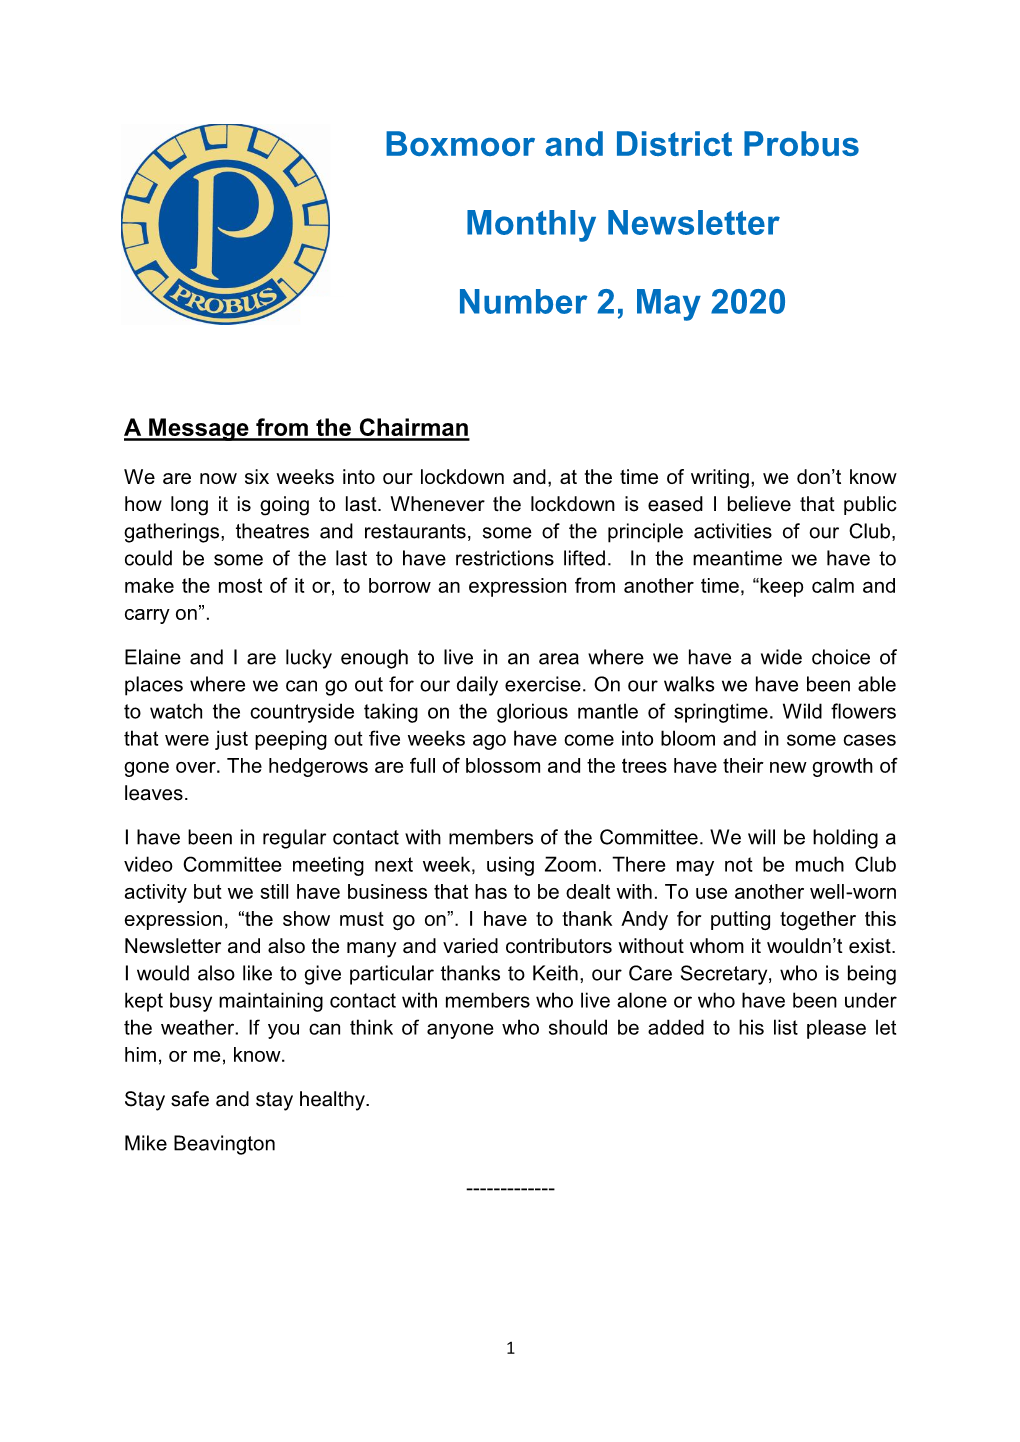 Boxmoor and District Probus Monthly Newsletter Number 2, May 2020